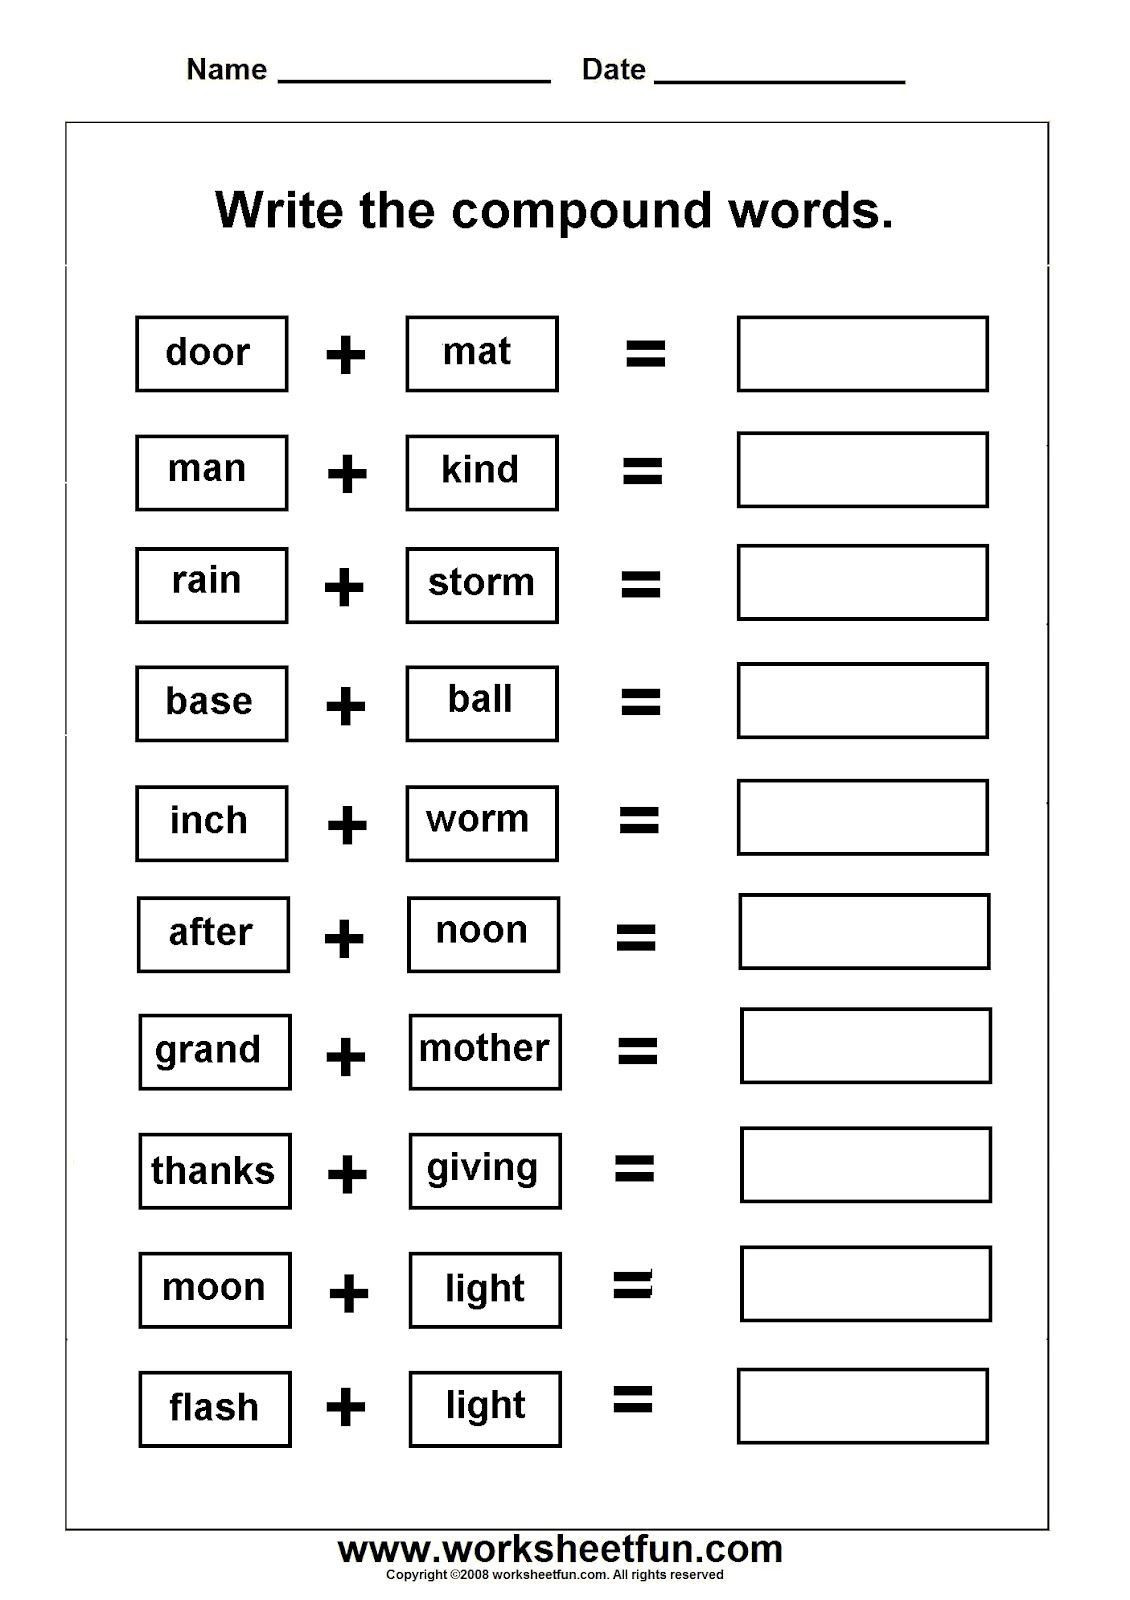 Free Printable Compound Word Worksheets Pound Words Worksheets Grade 3 Worksheets Pound Words